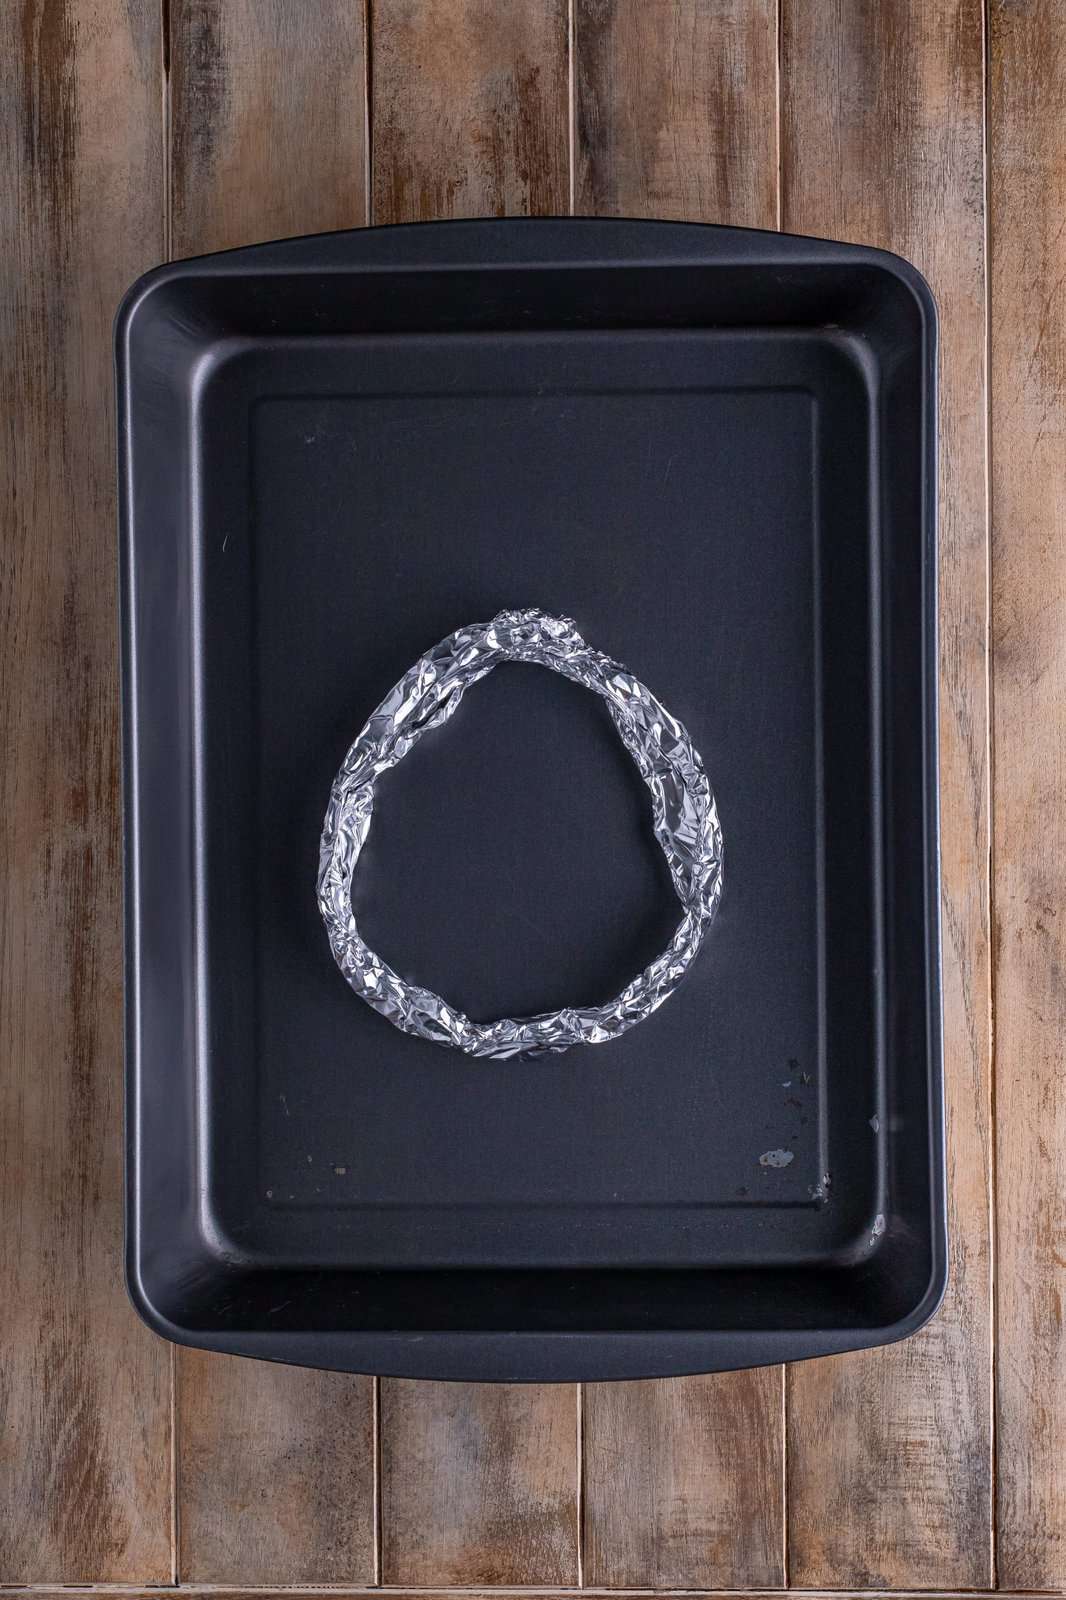 Tin foil ring placed into bottom of baking pan.